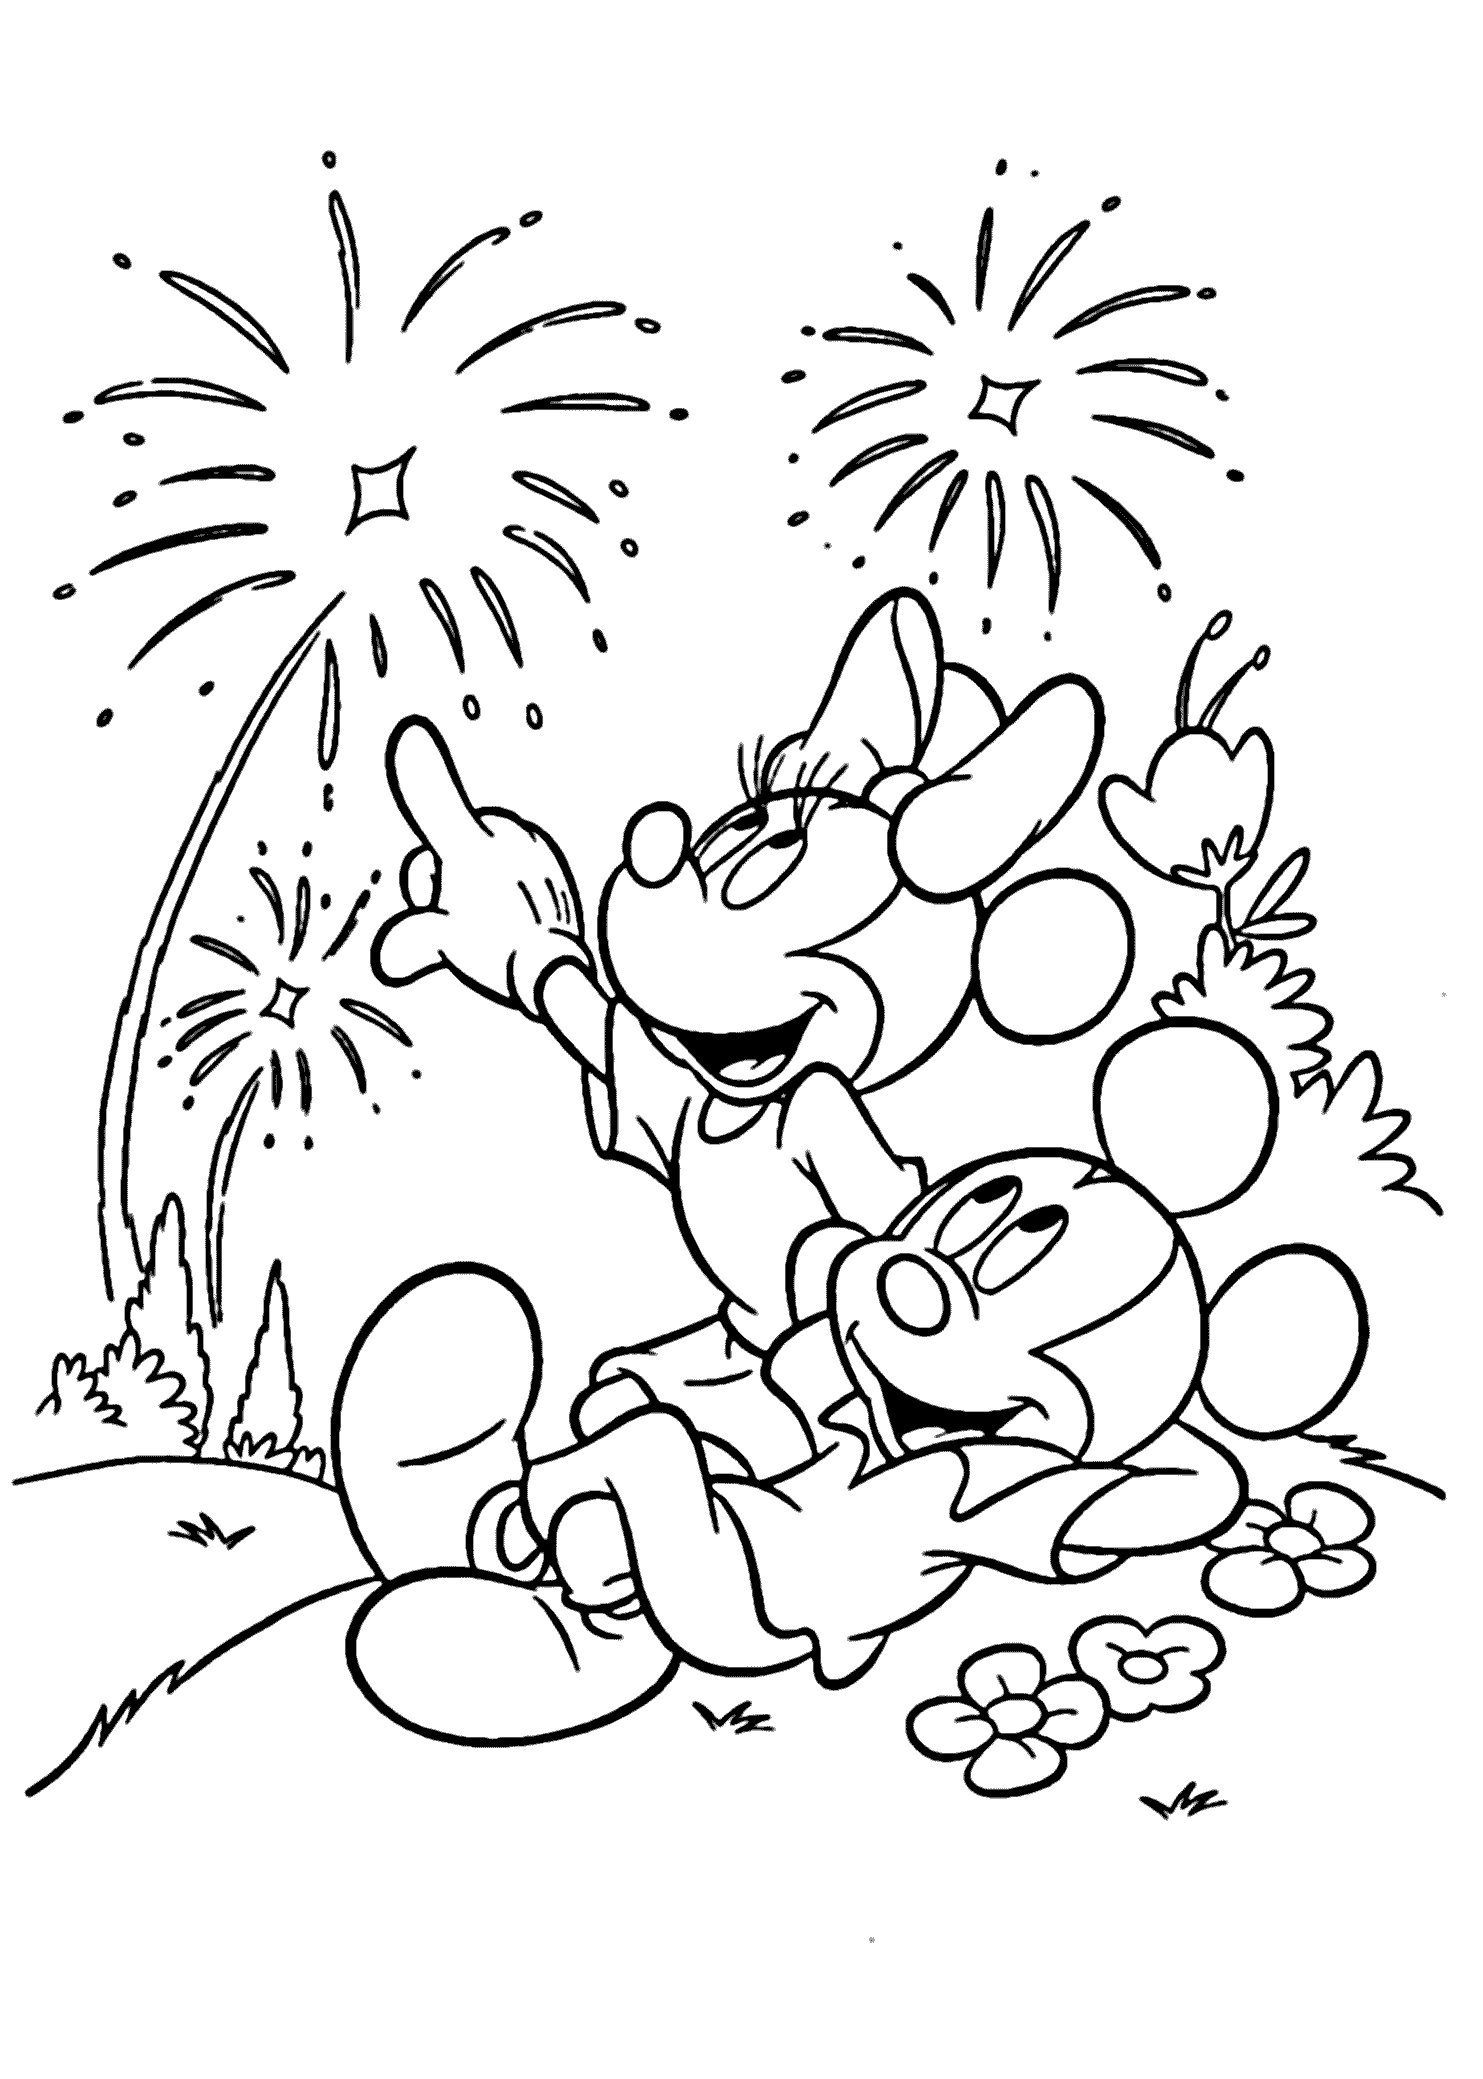 Firework Coloring Pages
 4th of July Coloring Pages Best Coloring Pages For Kids